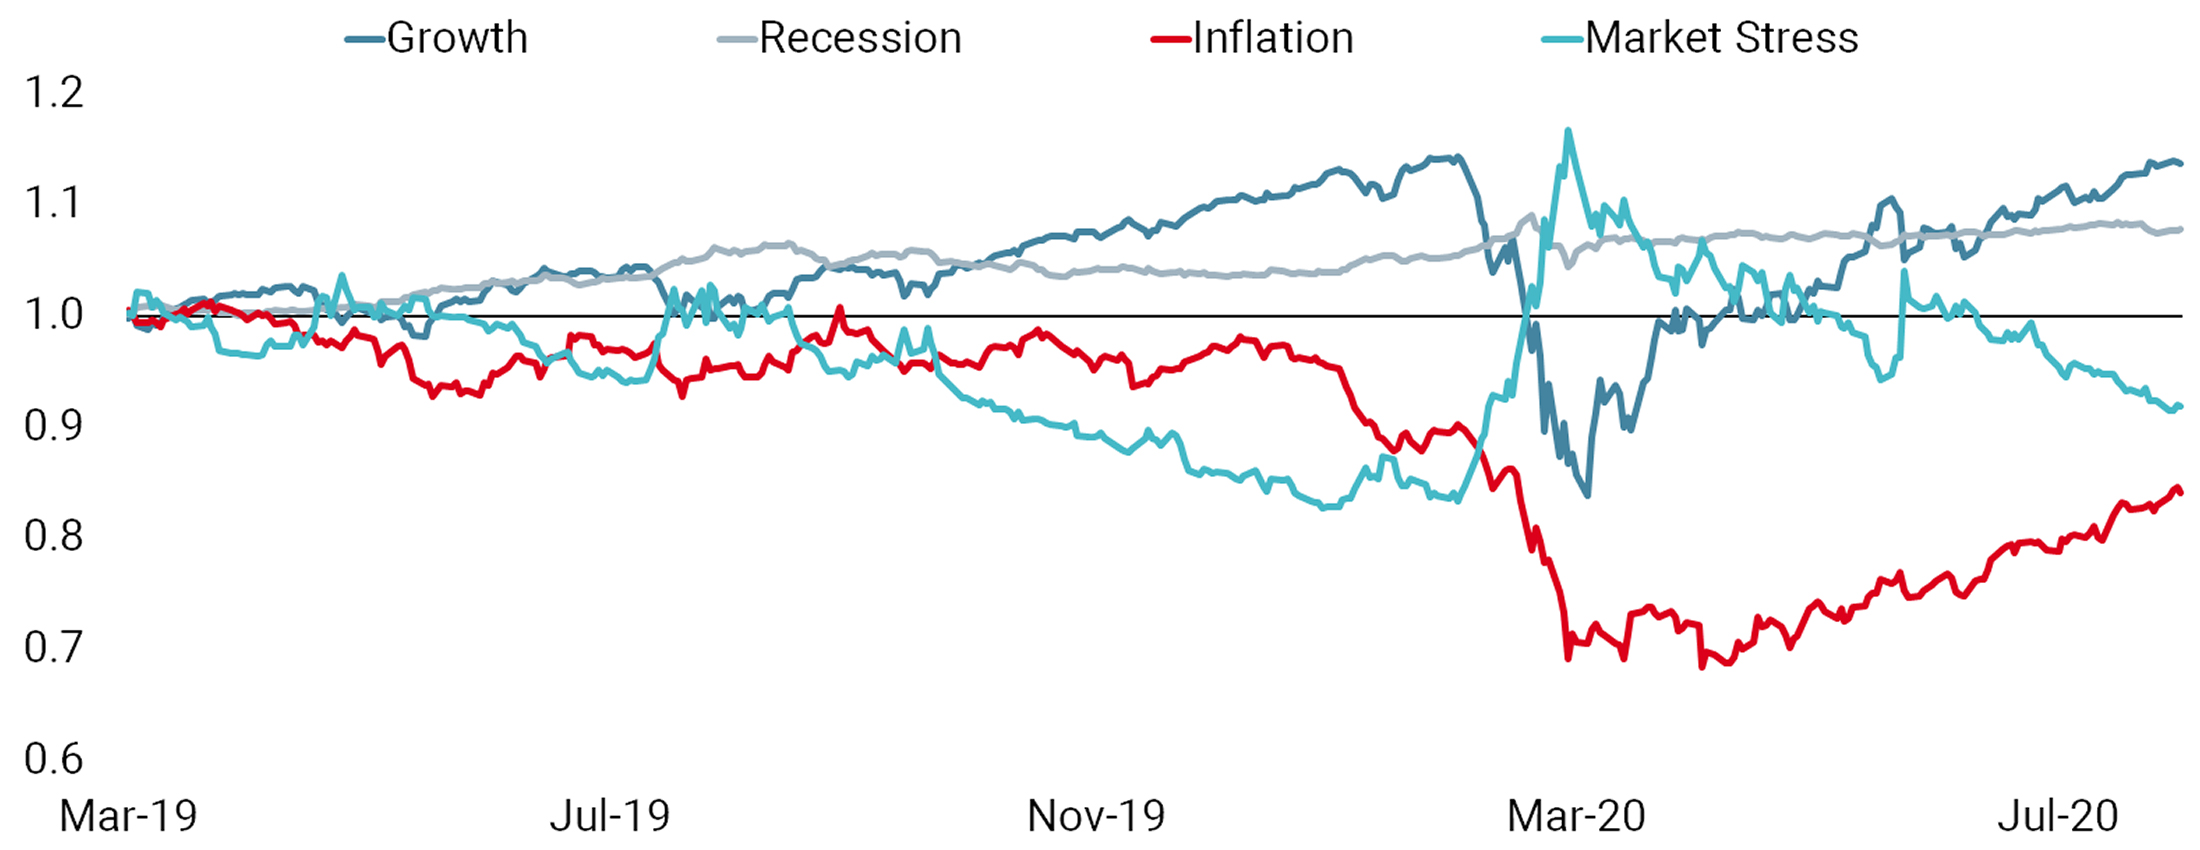 Is Inflation Knocking on the Door?